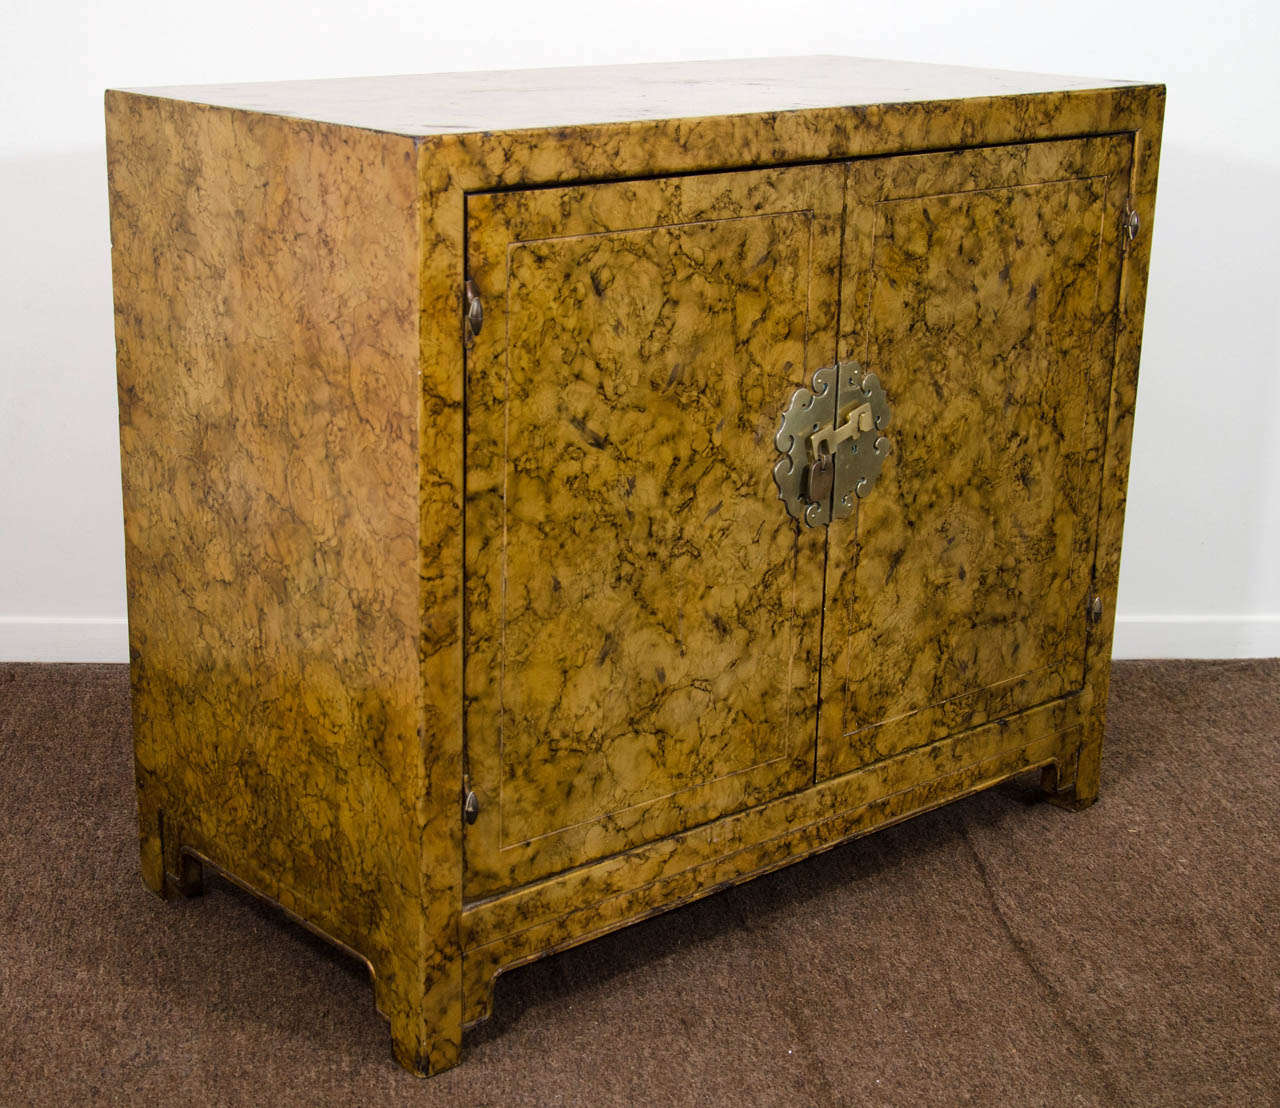 A vintage Asian-inspired two door cabinet with brass detailing and Faux tortoise finish. 

Vintage condition with some wear around the edges.  There are some nicks and scratches along with small cracks to the surface.